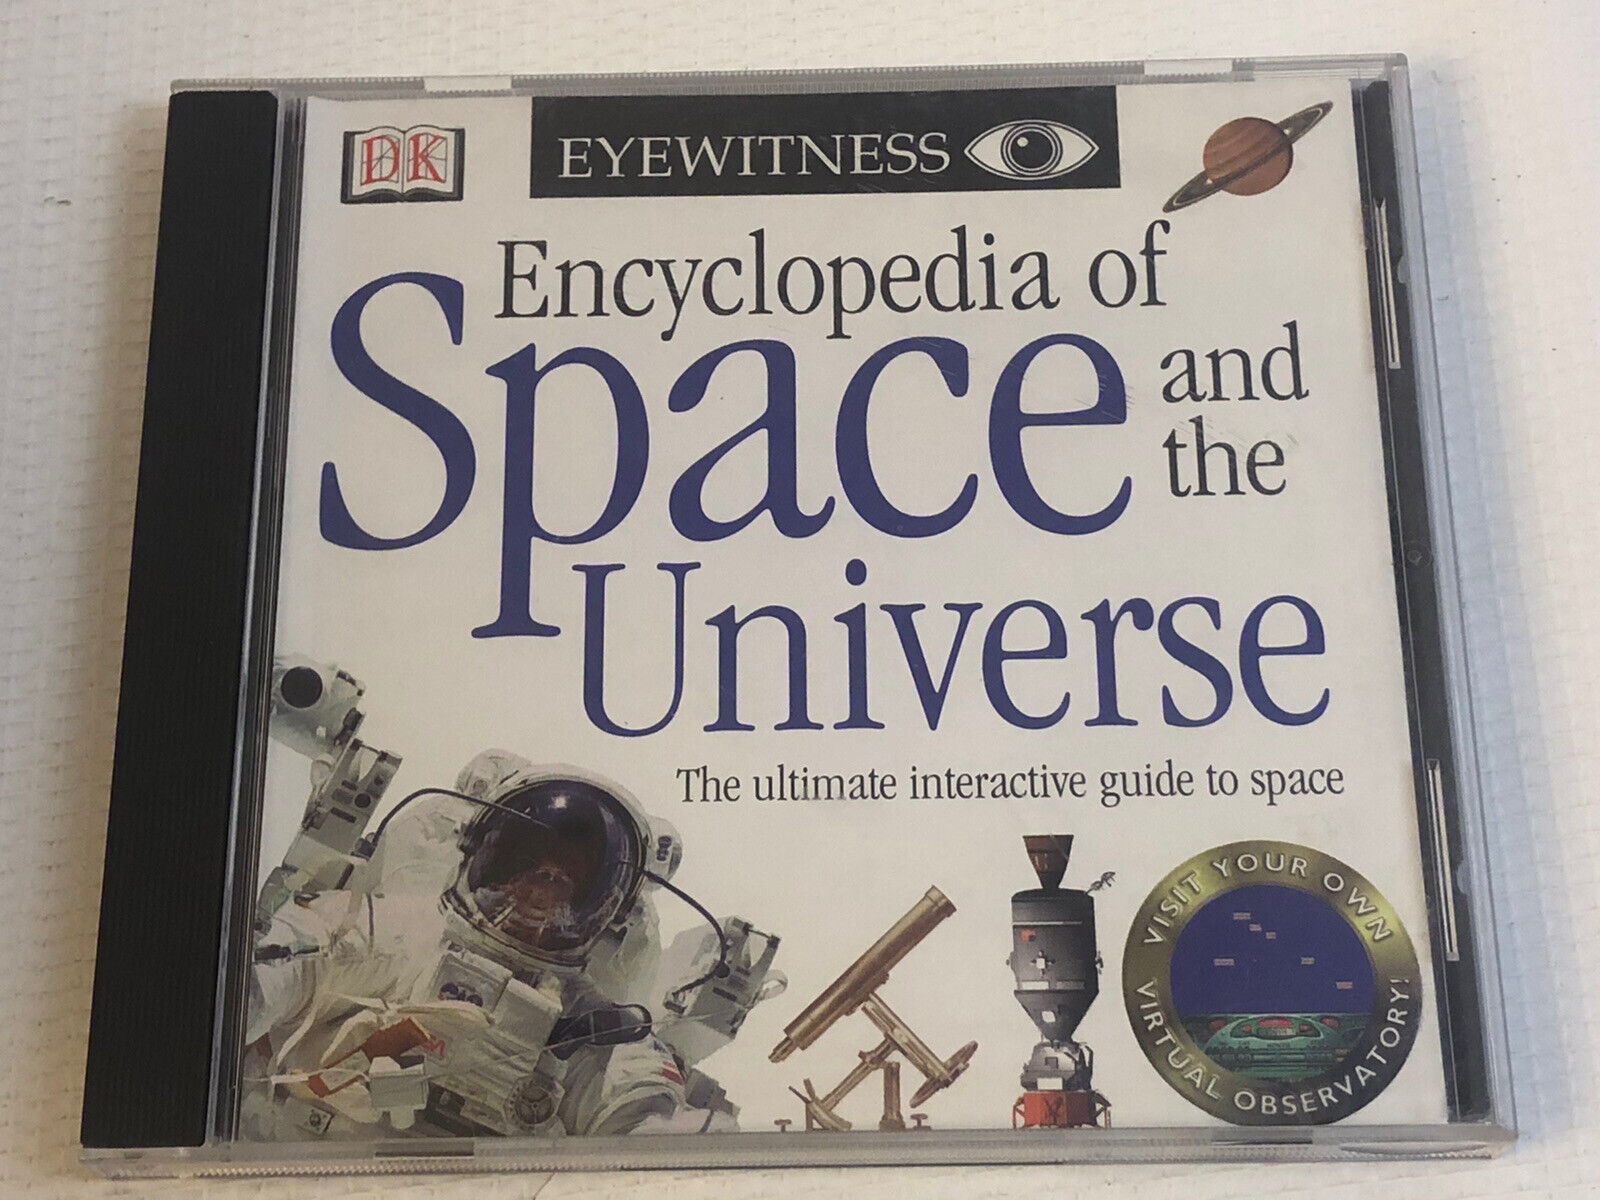 Eyewitness Encyclopedia of Space and the Universe 1996 CD The Ultimate Guide DK